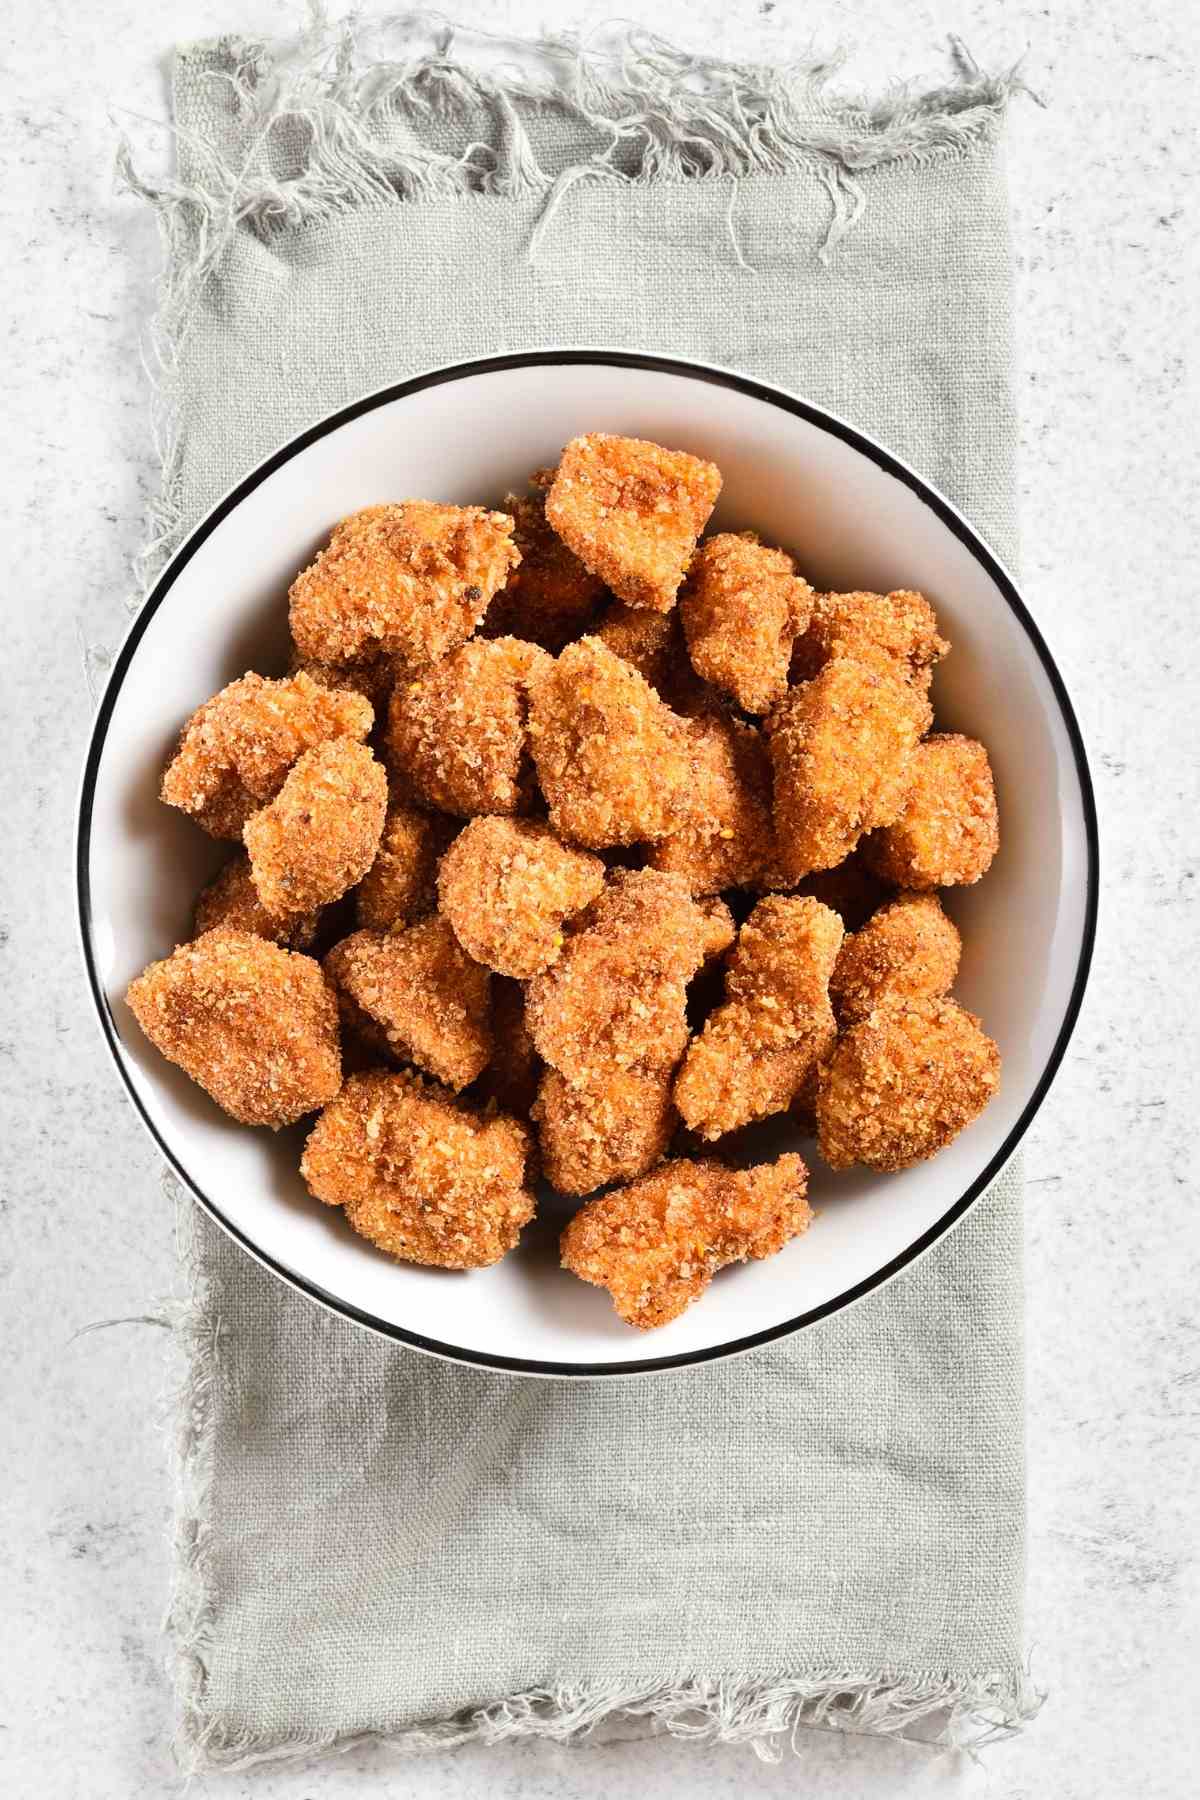 A more exciting way to enjoy chicken during the week! Boom Boom Chicken is juicy, tender chicken pieces coated in a delectable crunchy coating. It's so lip-smackingly good that you'll never want take-out food again!